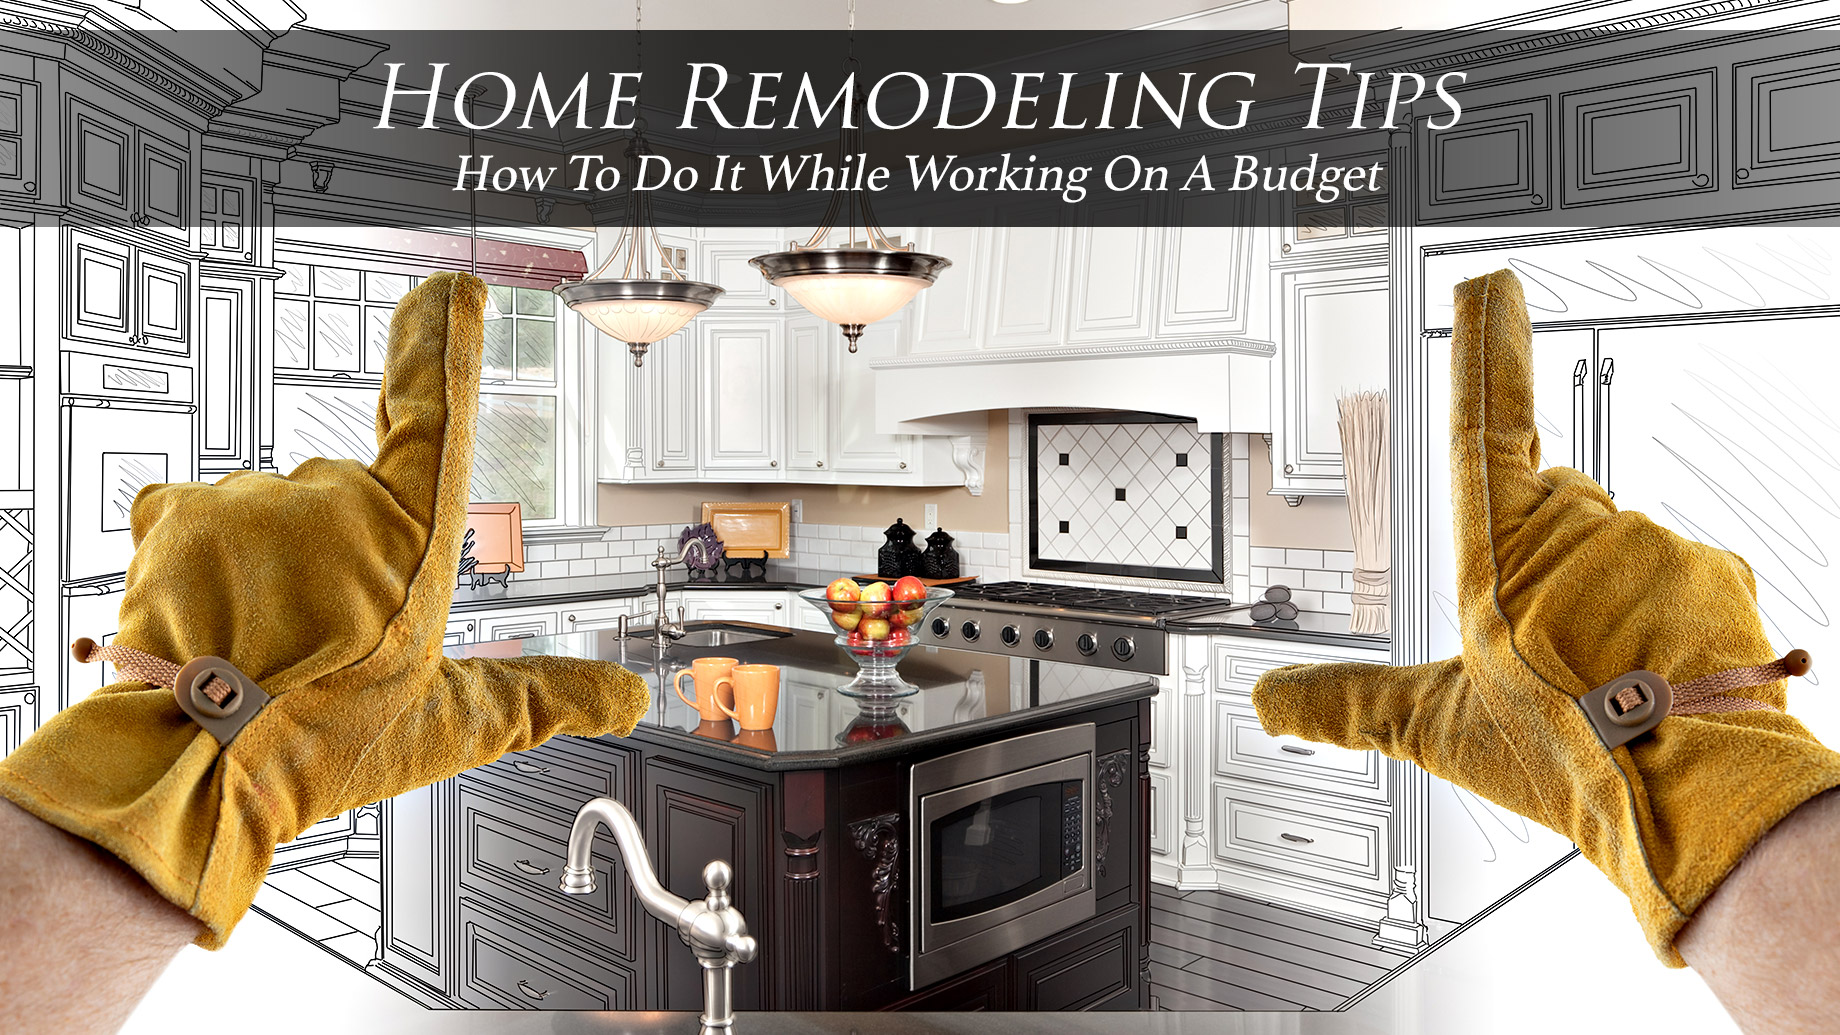 Home Remodeling Tips - How To Do It While Working On A Budget